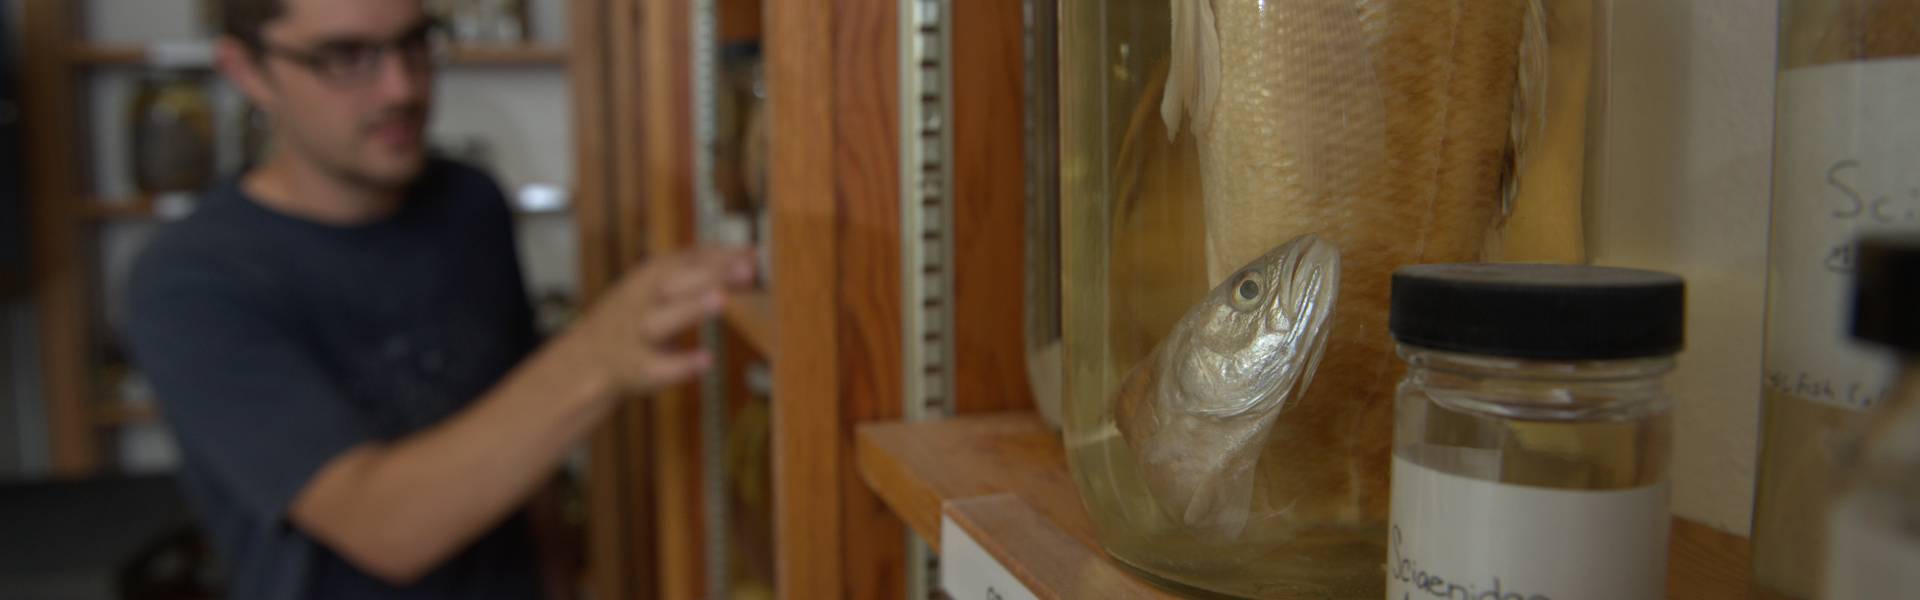 A fish specimen is displayed while a person views other specimens in the background.